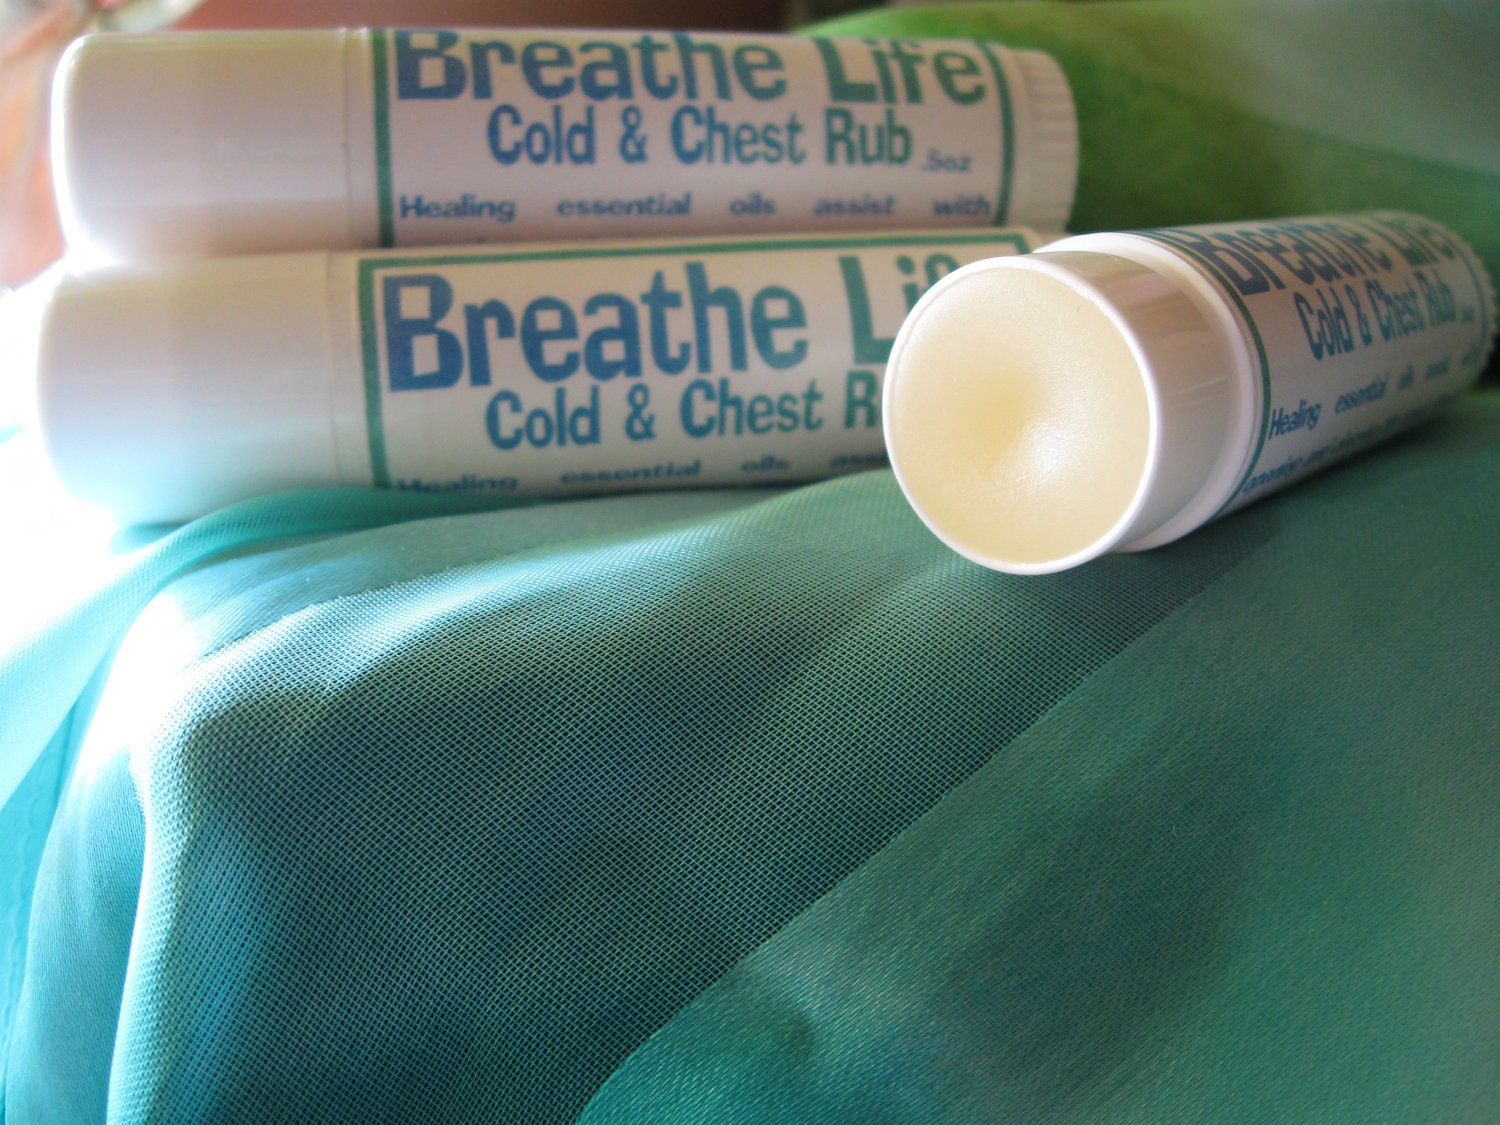 CHEST Rub and SINUS Relief... Breathe LIFE...Aromatic Vapors to open Breathing Passages